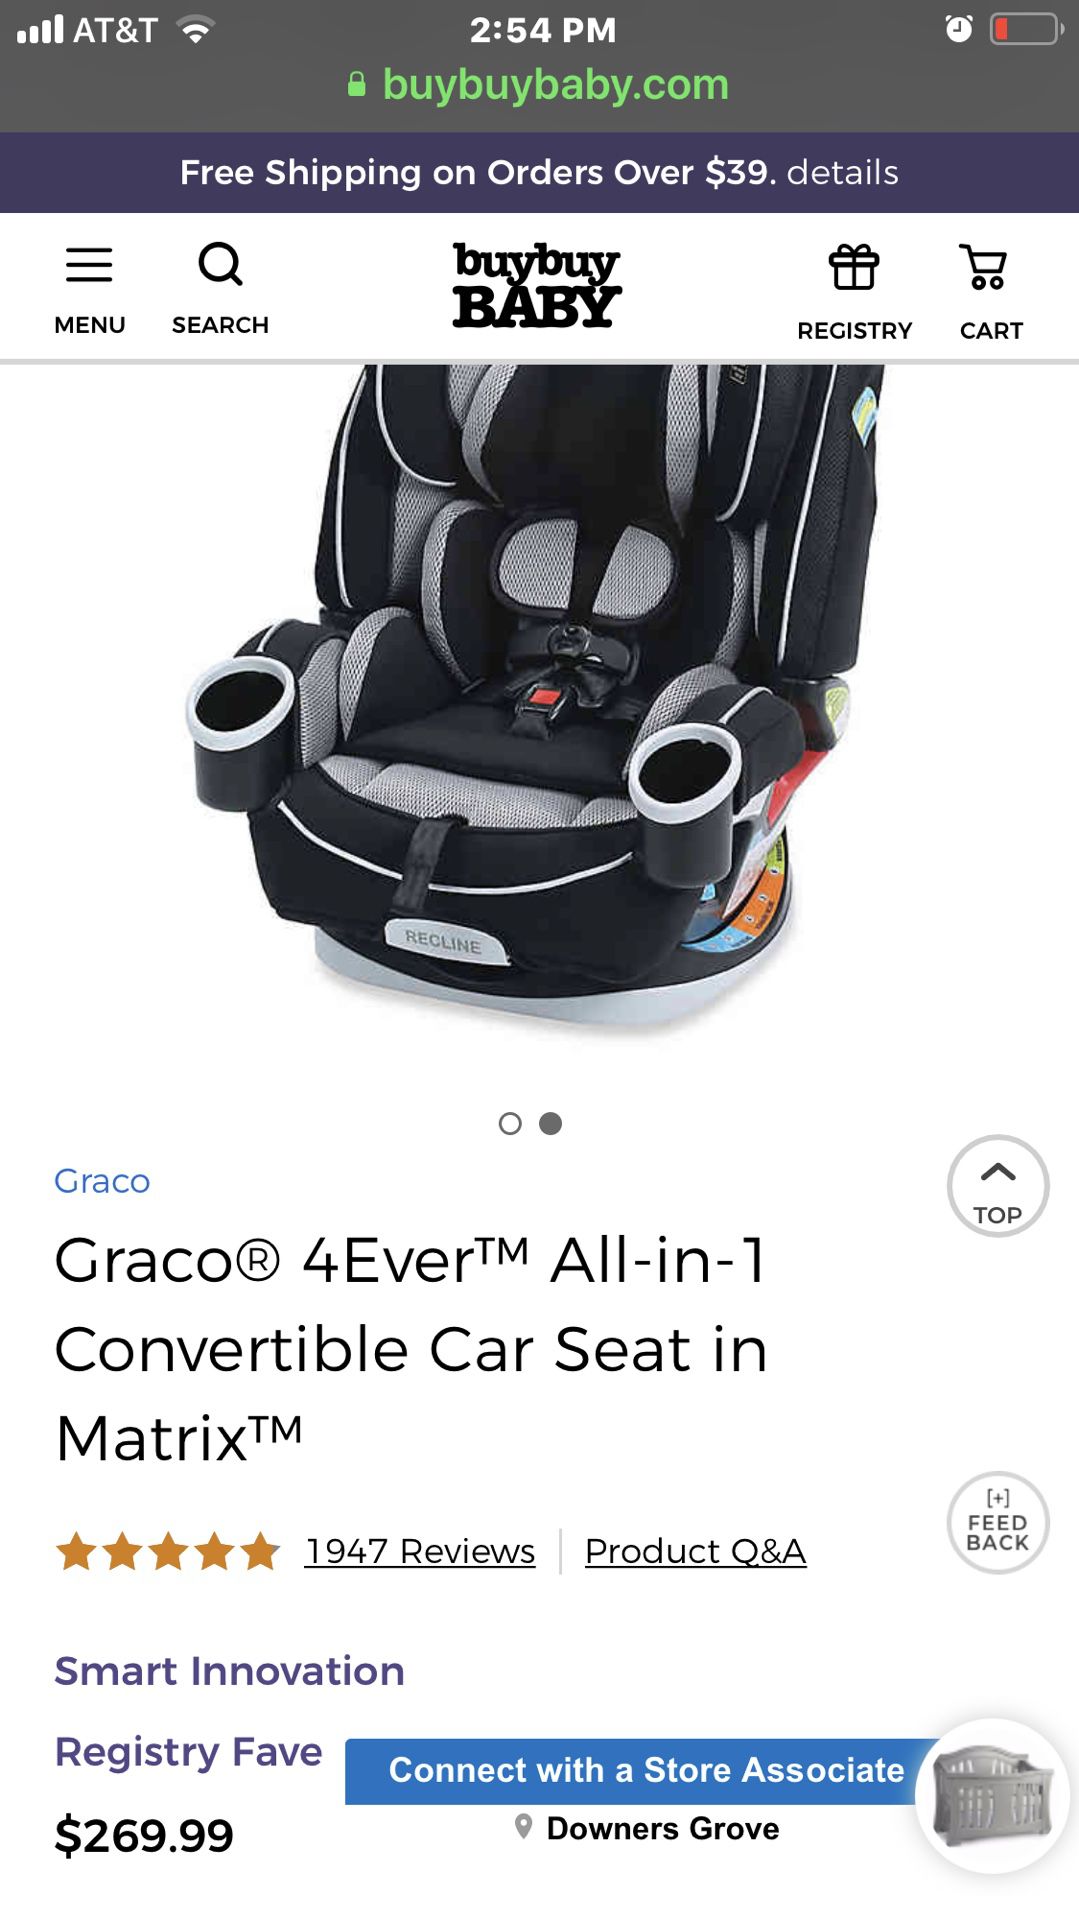 $100 off!! New in box Graco 4Ever All-In-One Car seat